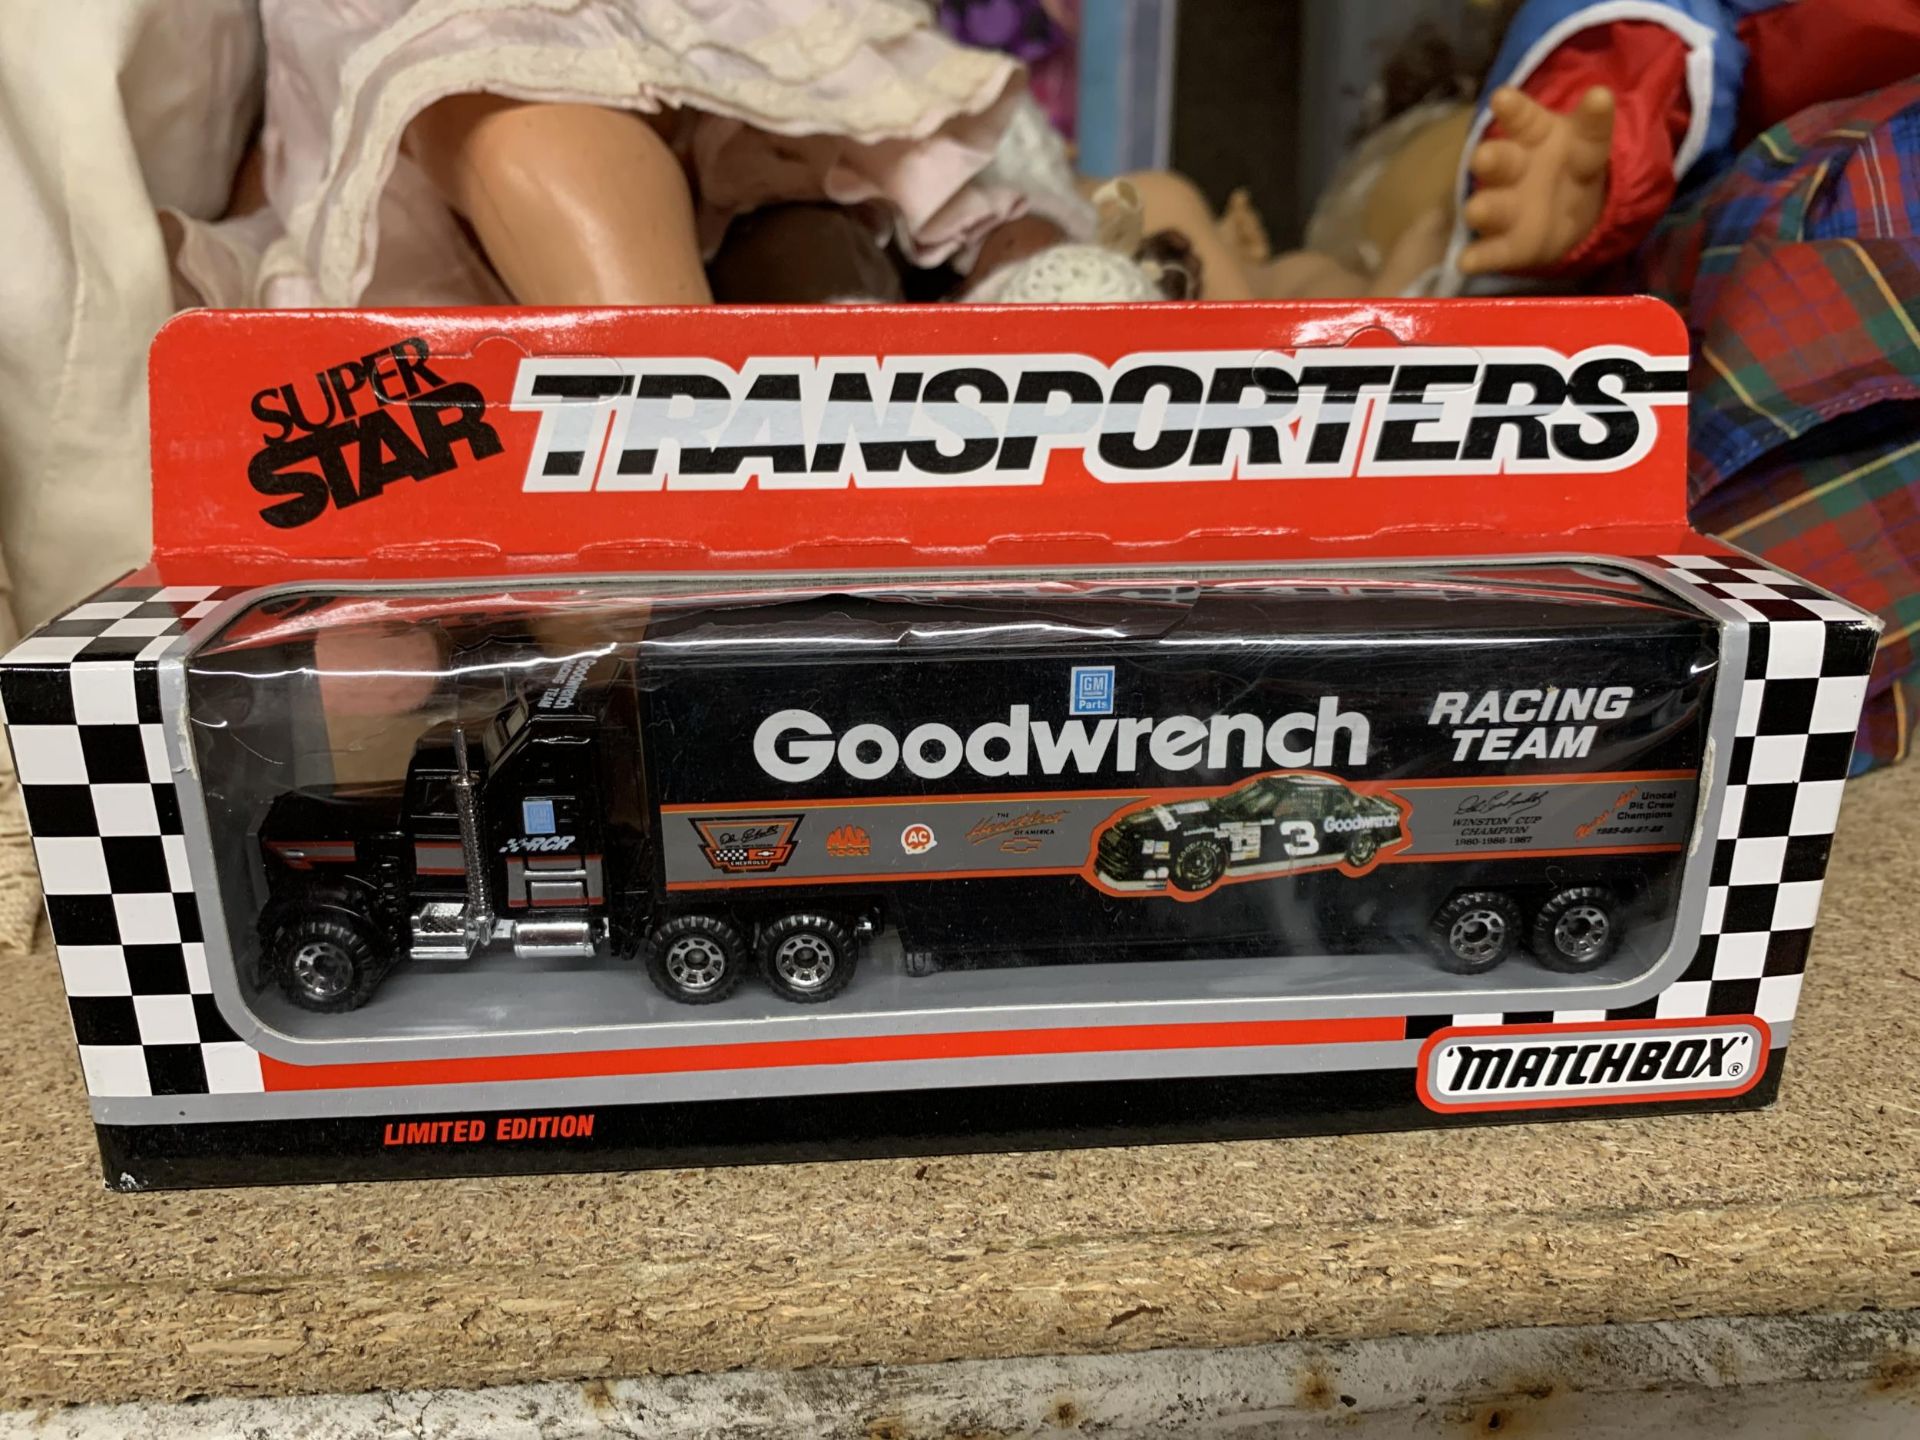 THREE BOXED 1990 MATCHBOX CONVOY TRUCKS - SUPER STAR TRANSPORTERS, U.S.A LIMITED EDITIONS - Image 3 of 4